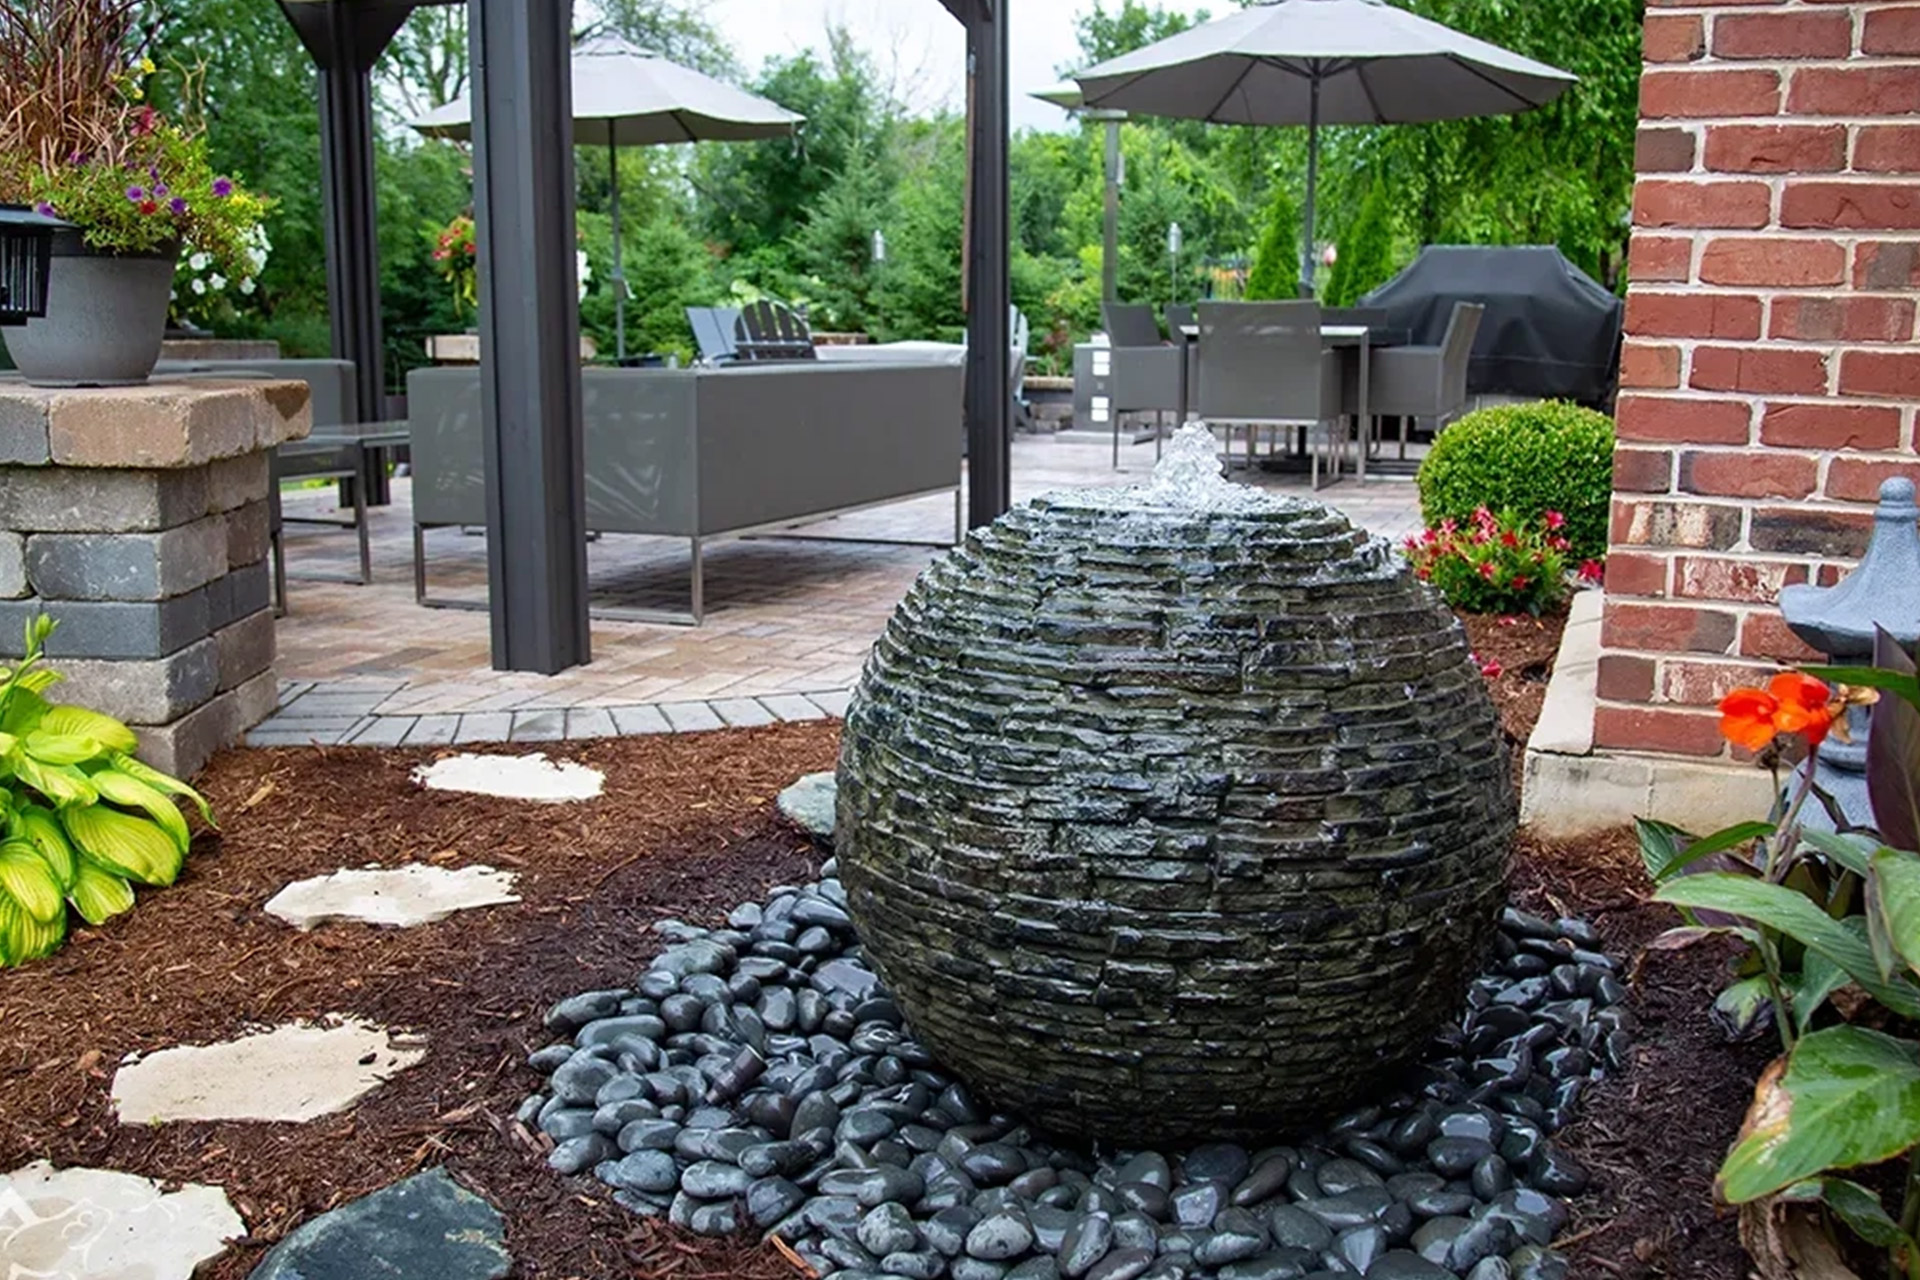 A big sphere rock water fountain as part of a backyard landscaping.